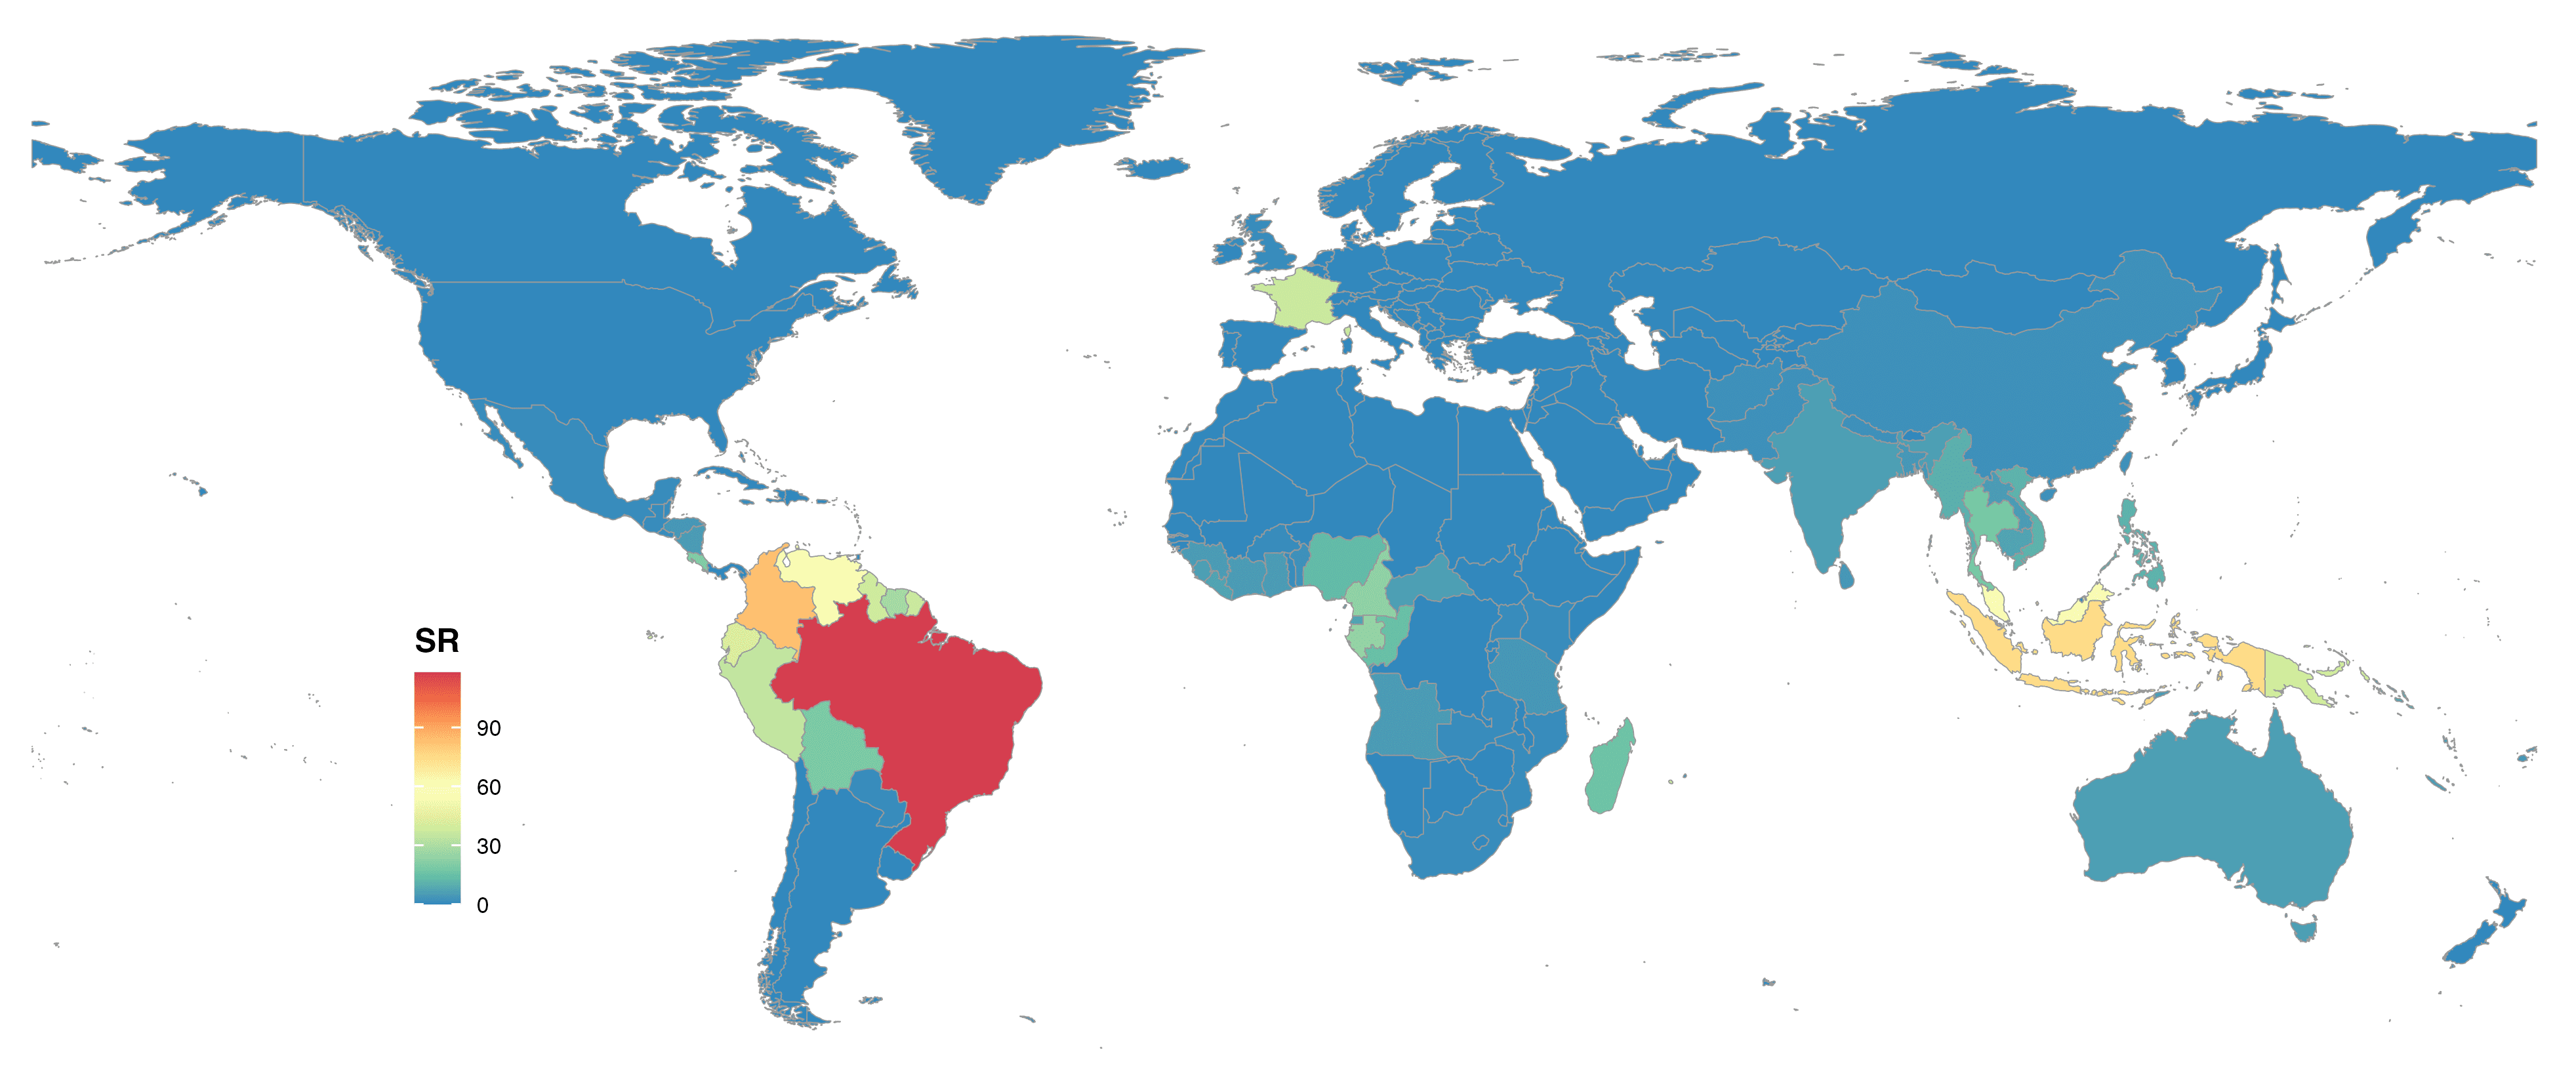 FIGURE 4. Global species richness of Lecythidaceae at country level and colored with Spectral scale.